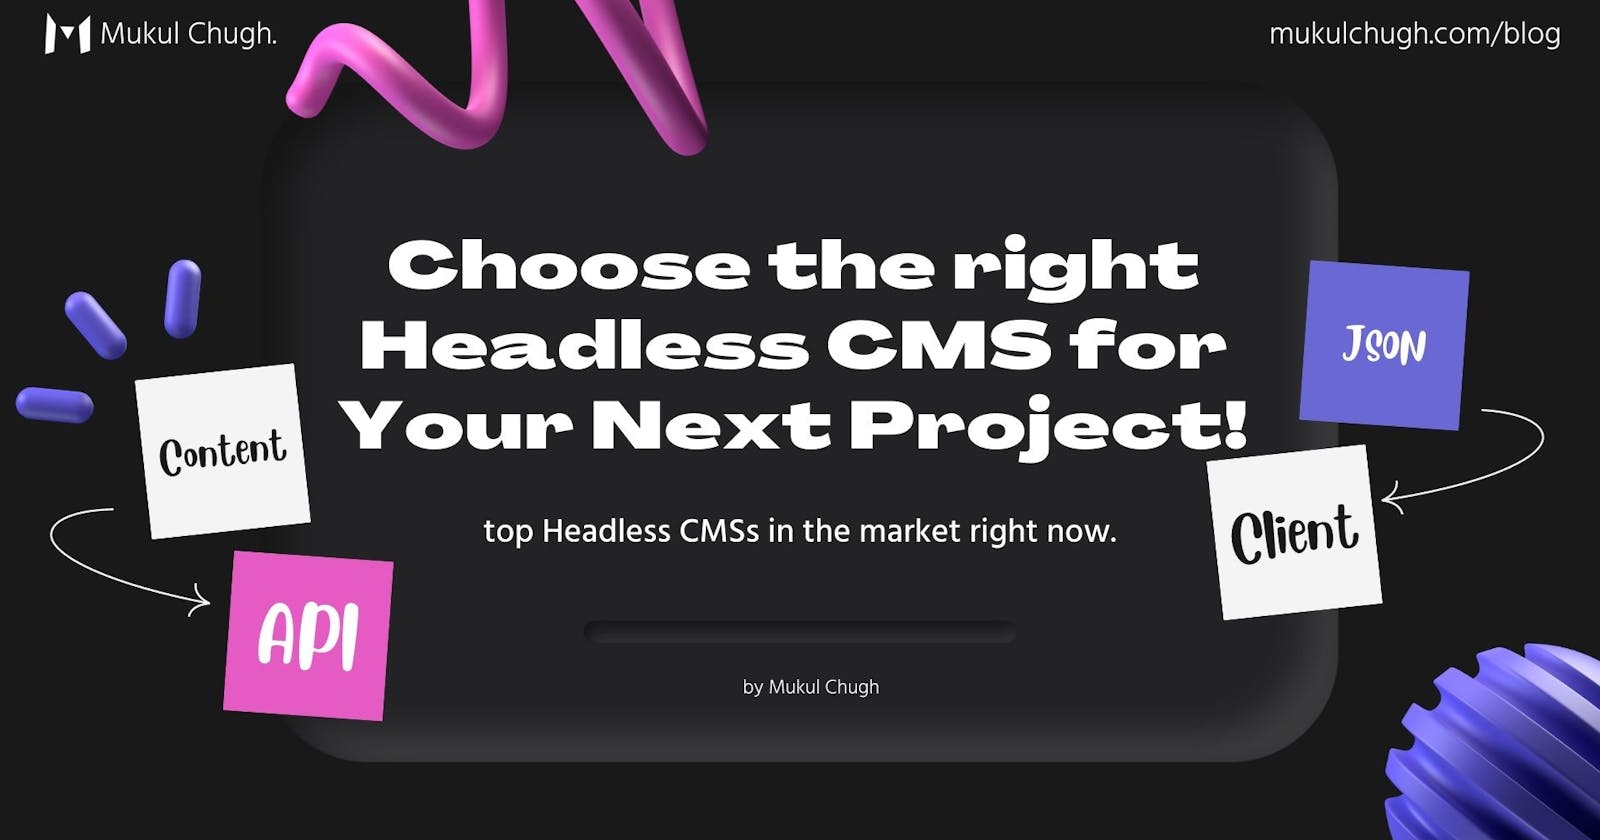 Choosing the best Headless CMS for your next Project